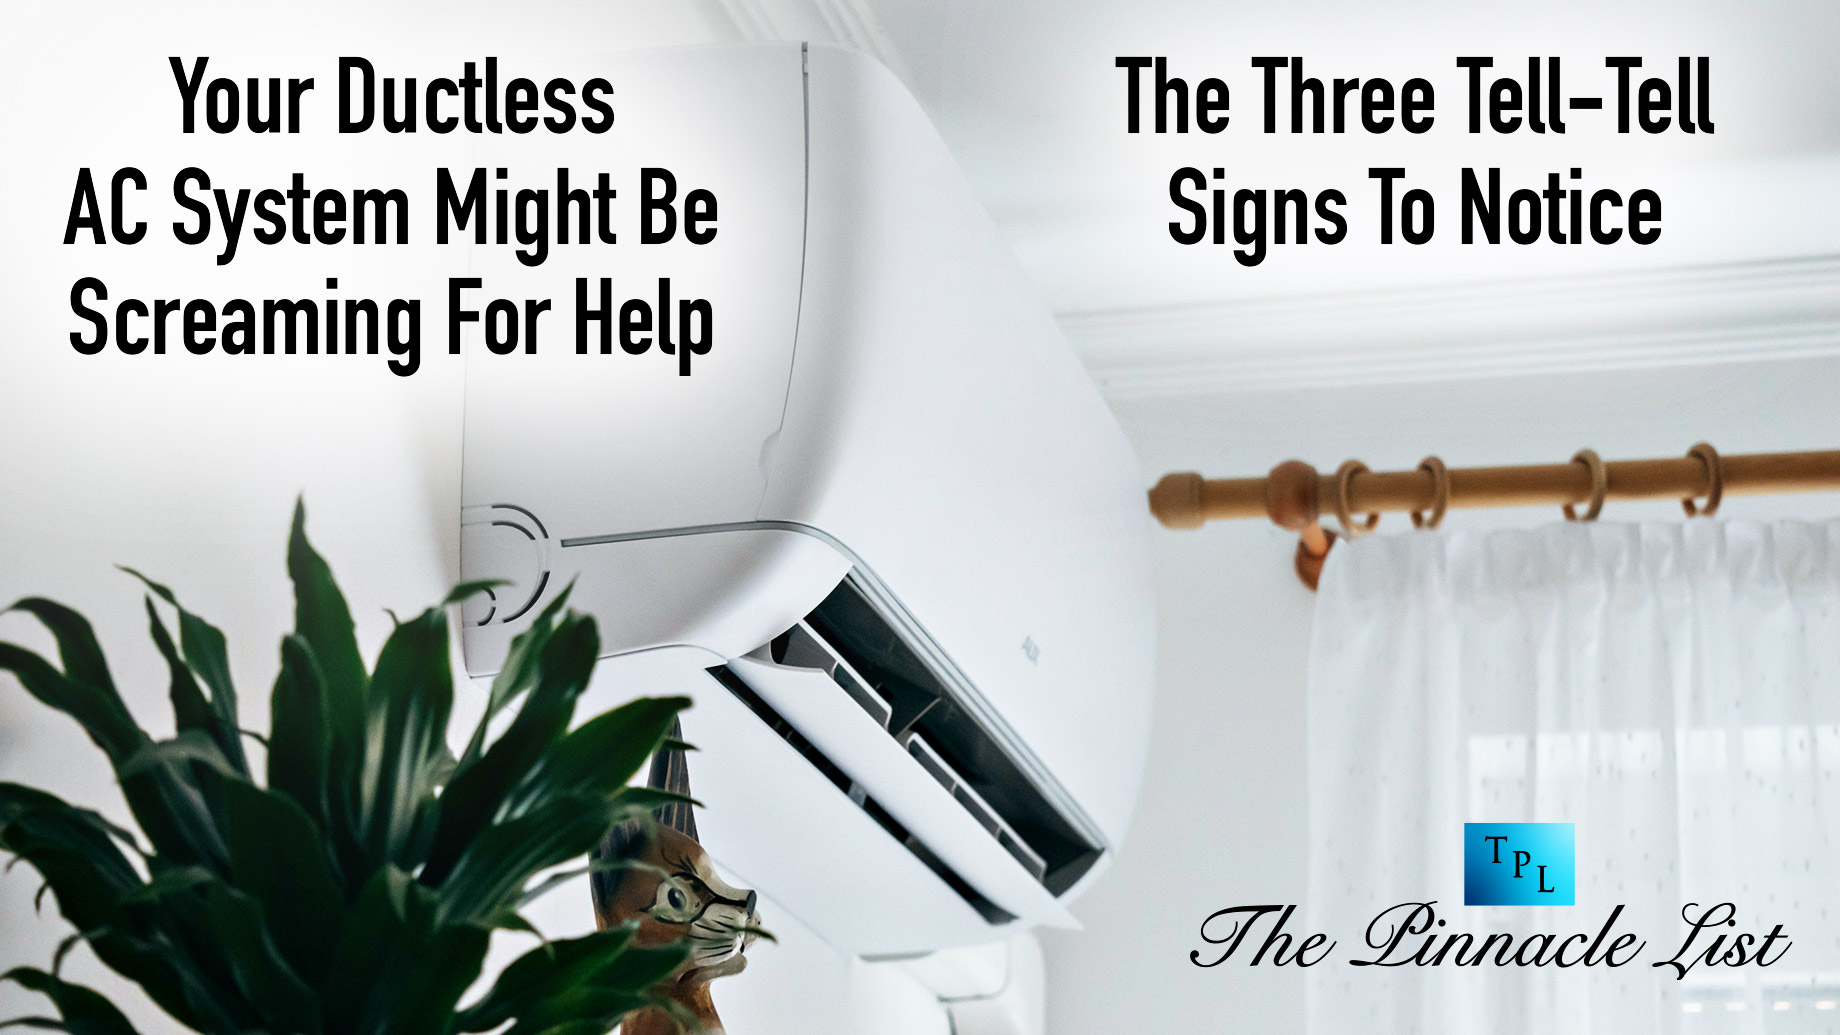 Your Ductless AC System Might Be Screaming For Help - The Three Tell-Tell Signs To Notice